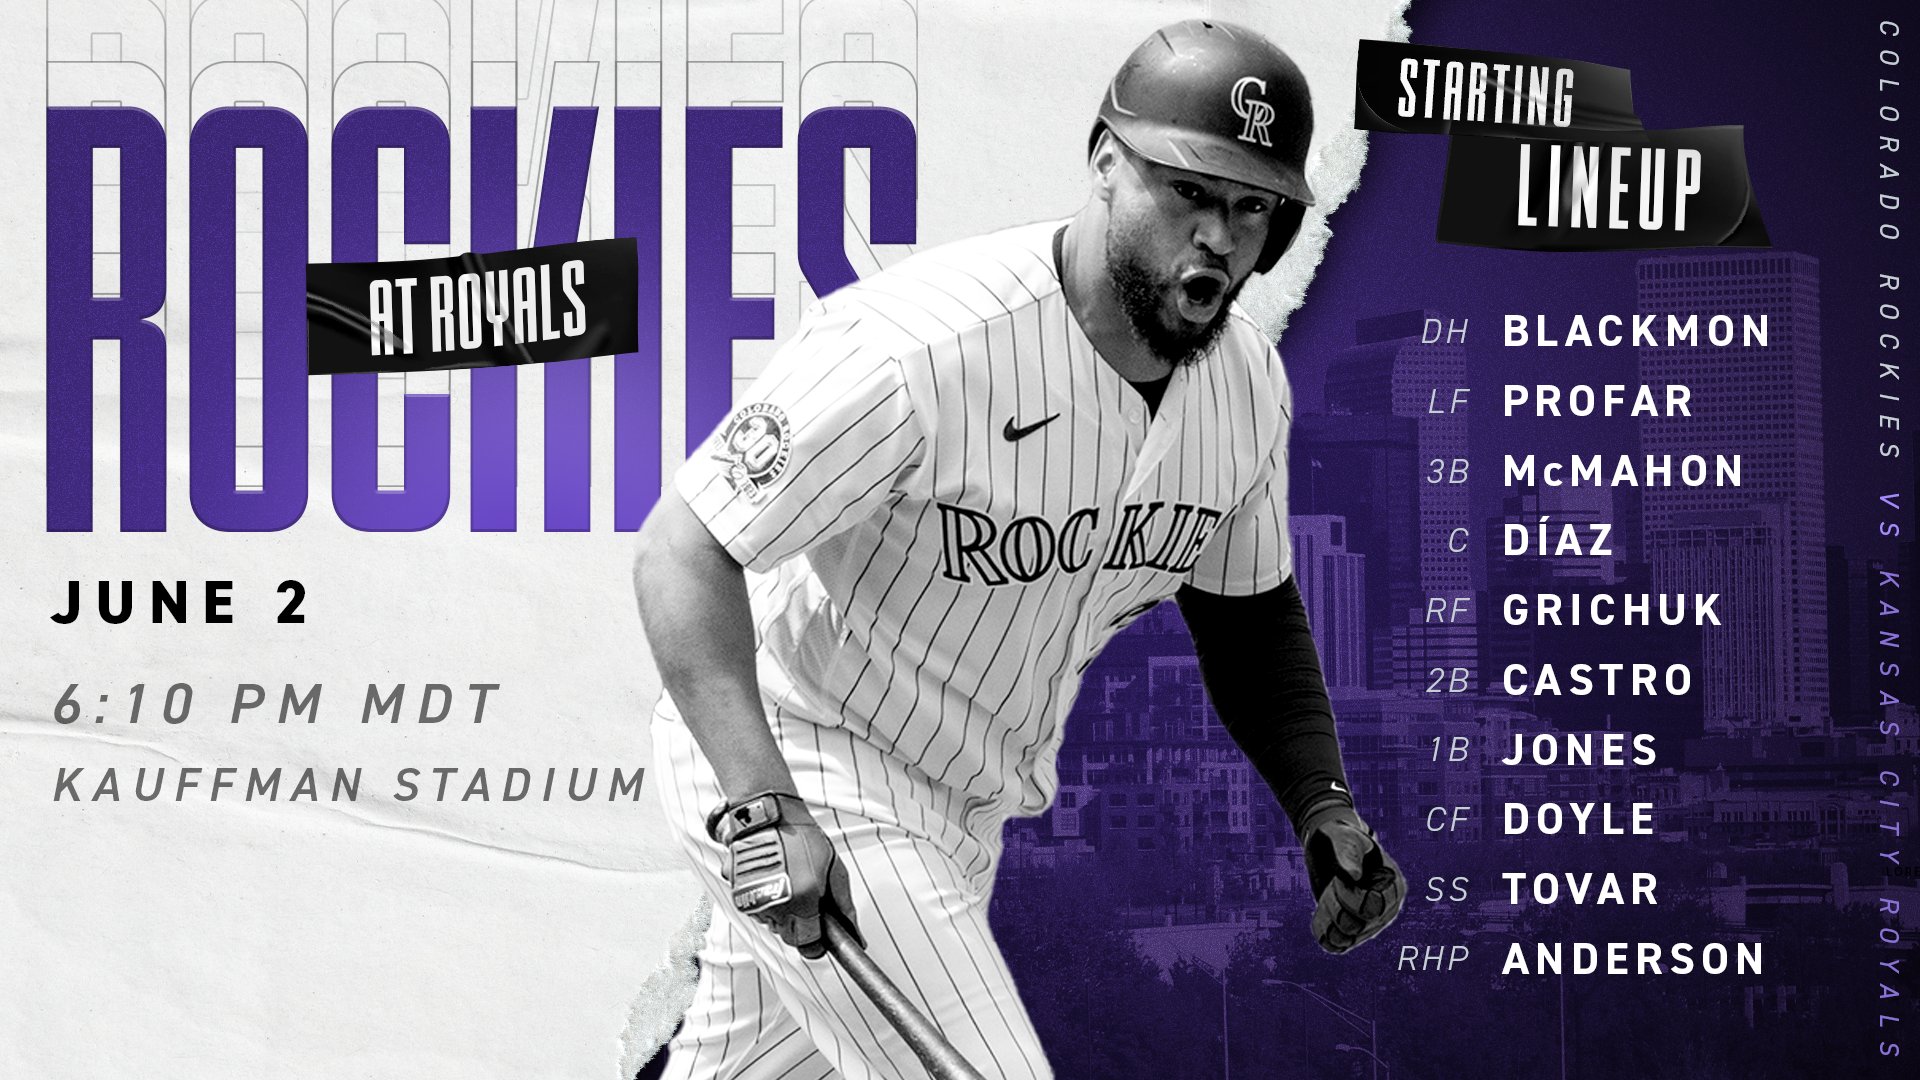 Colorado Rockies on Twitter: Game one of three in KC